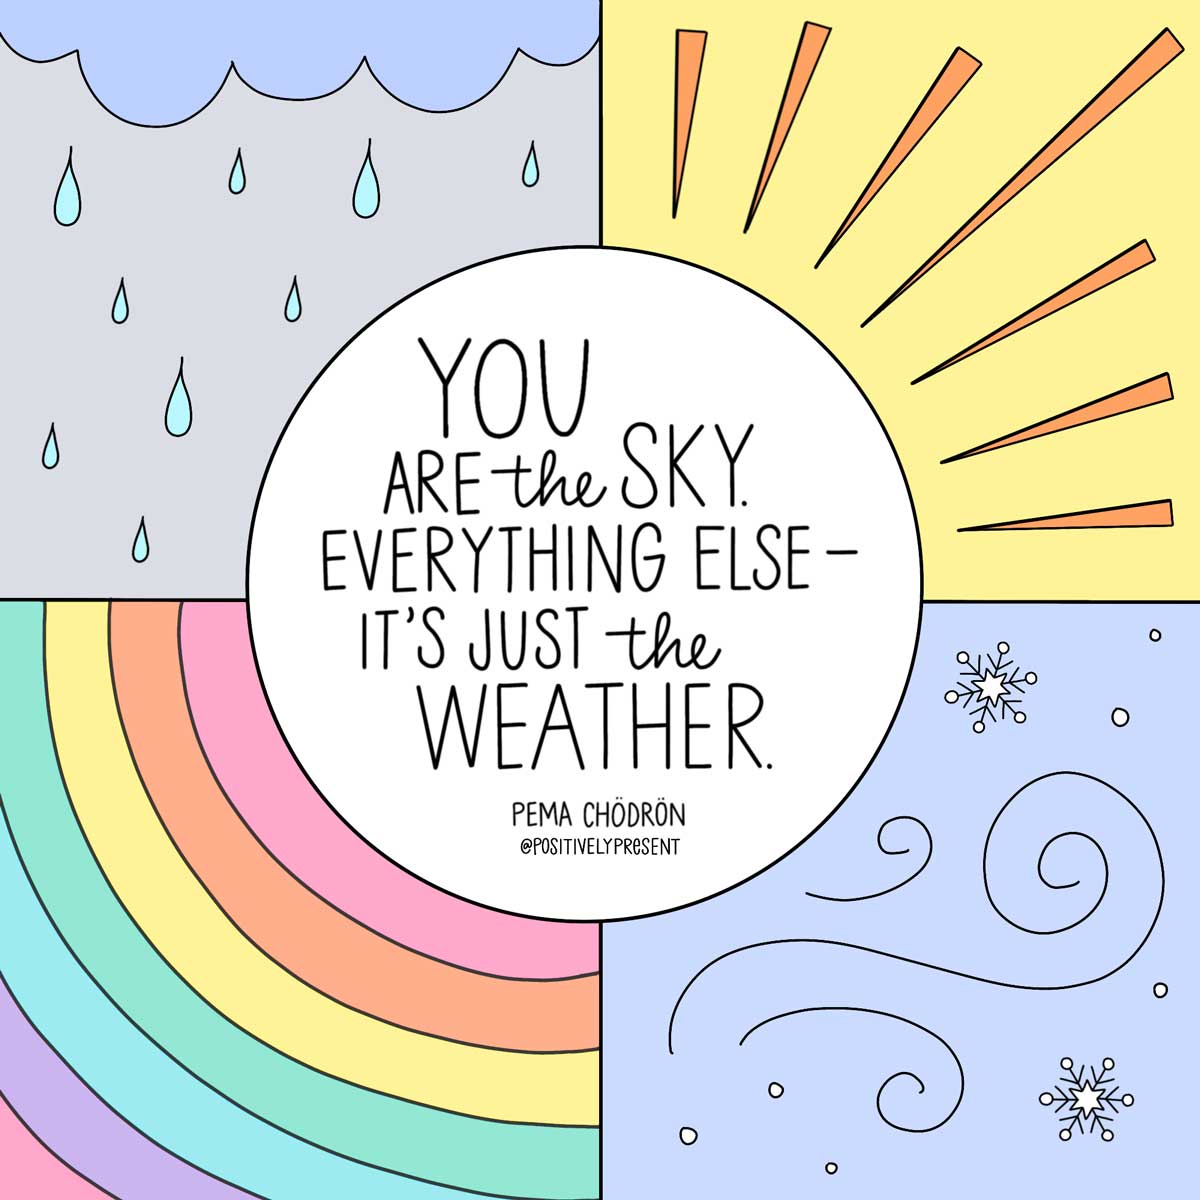 art shows four kinds of weather with inspiring quote.